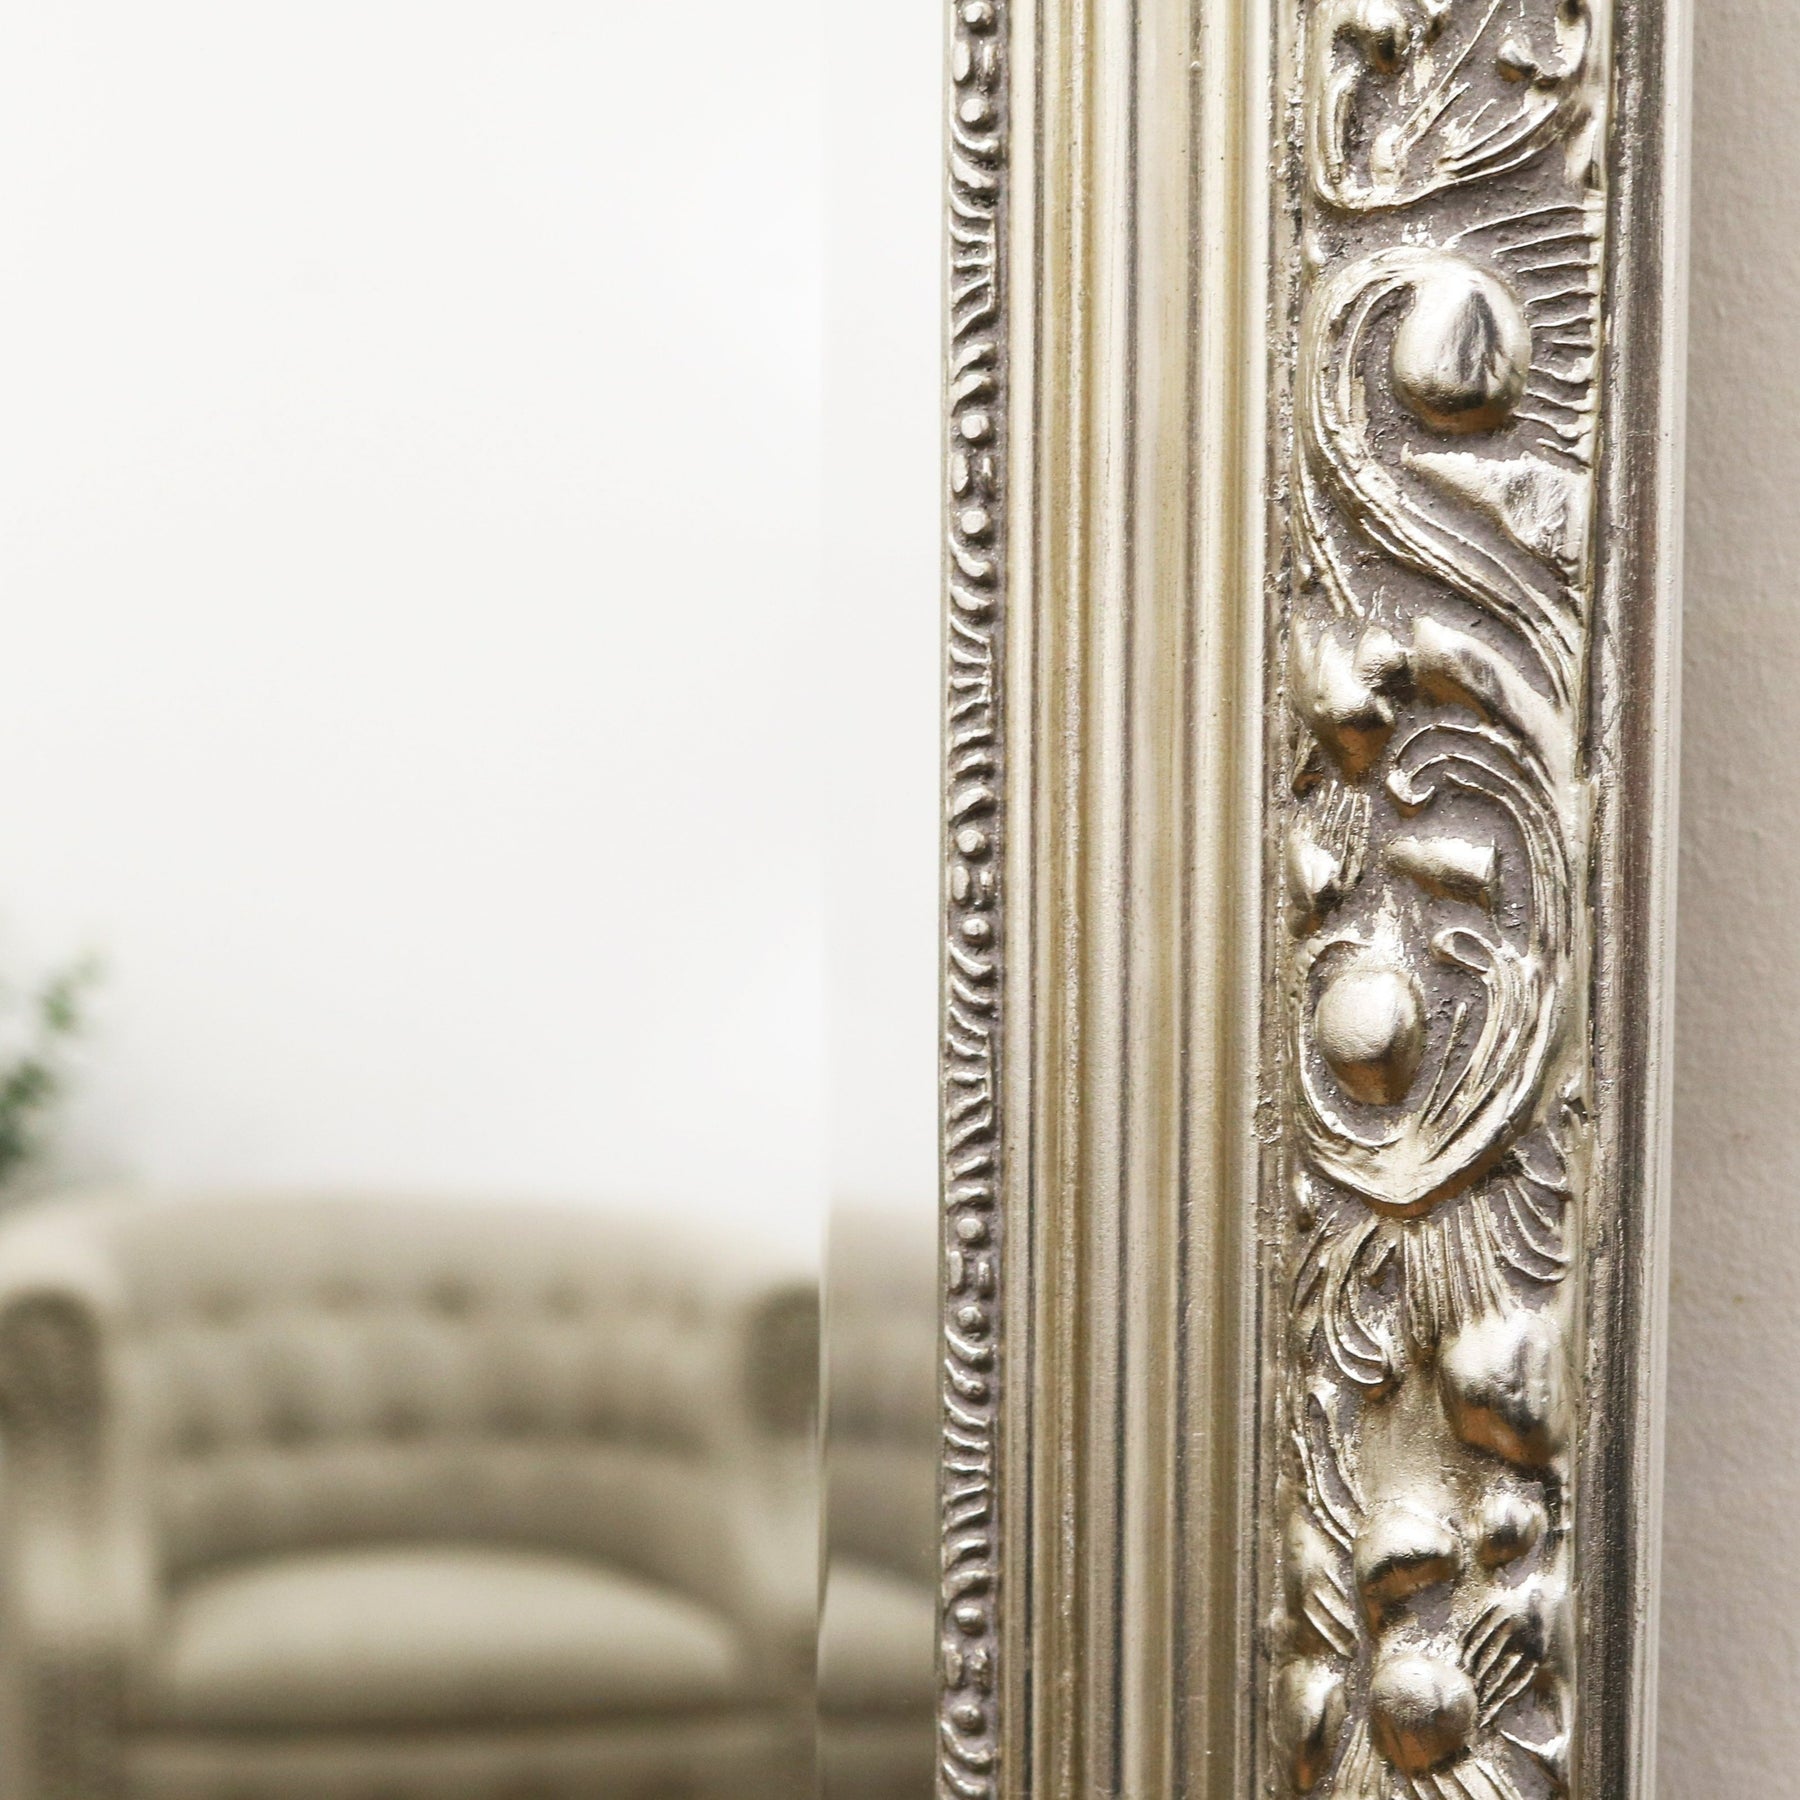 Silver Arched Ornate Overmantle Wall Mirror detail shot of side